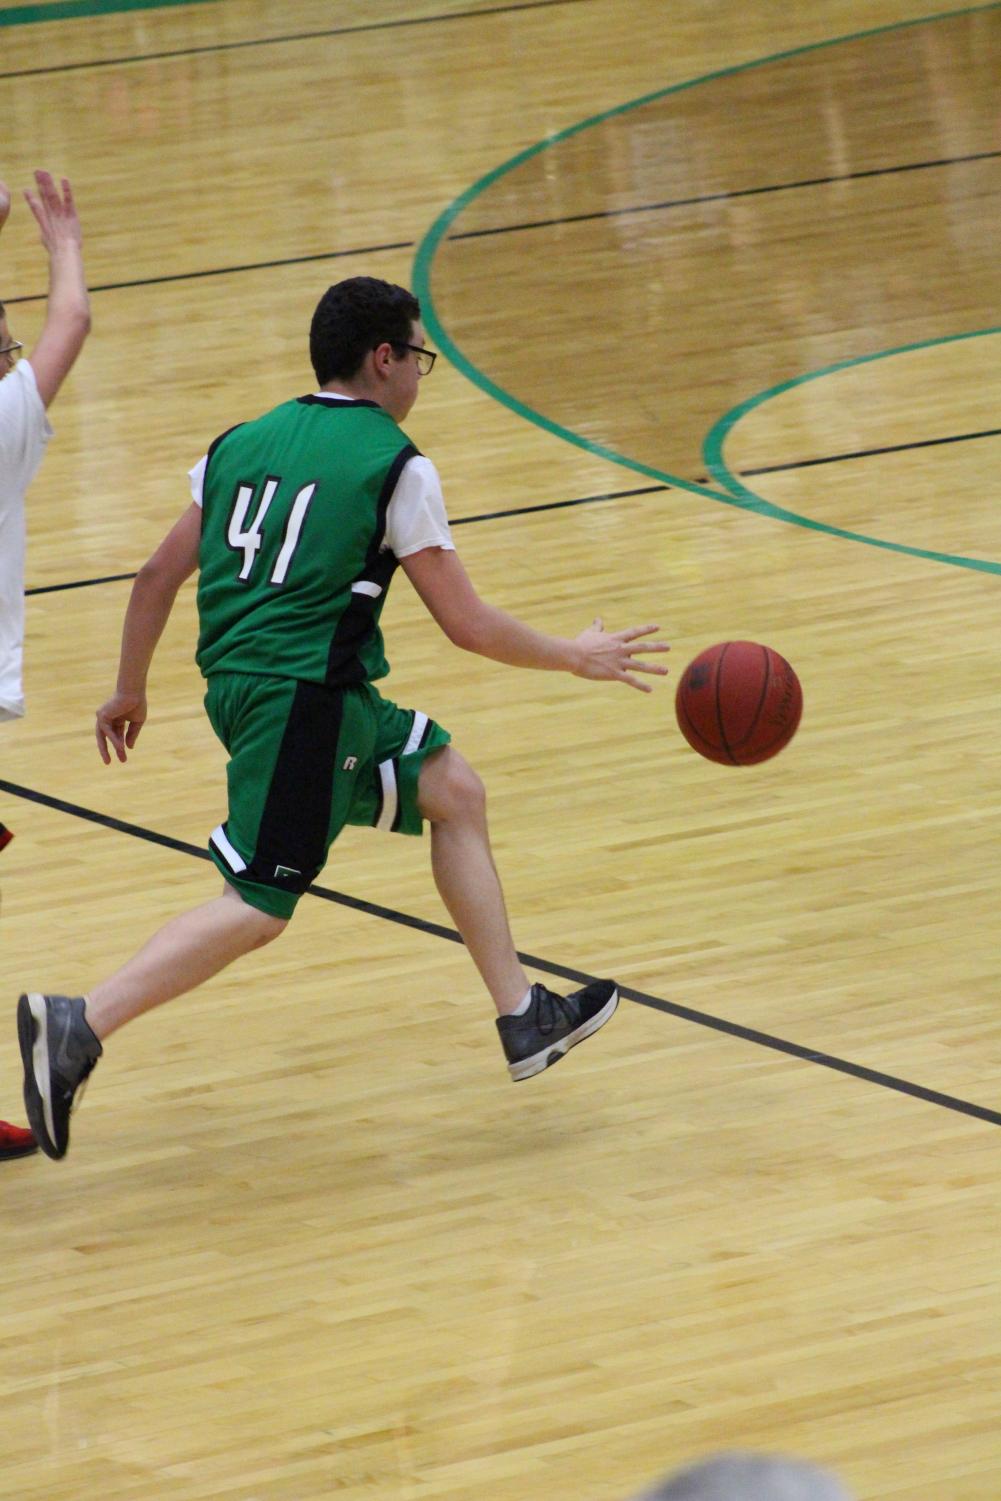 Panther+Pals+basketball+game+photo+gallery+%28photos+by+Kaitlyn+Strobel%29